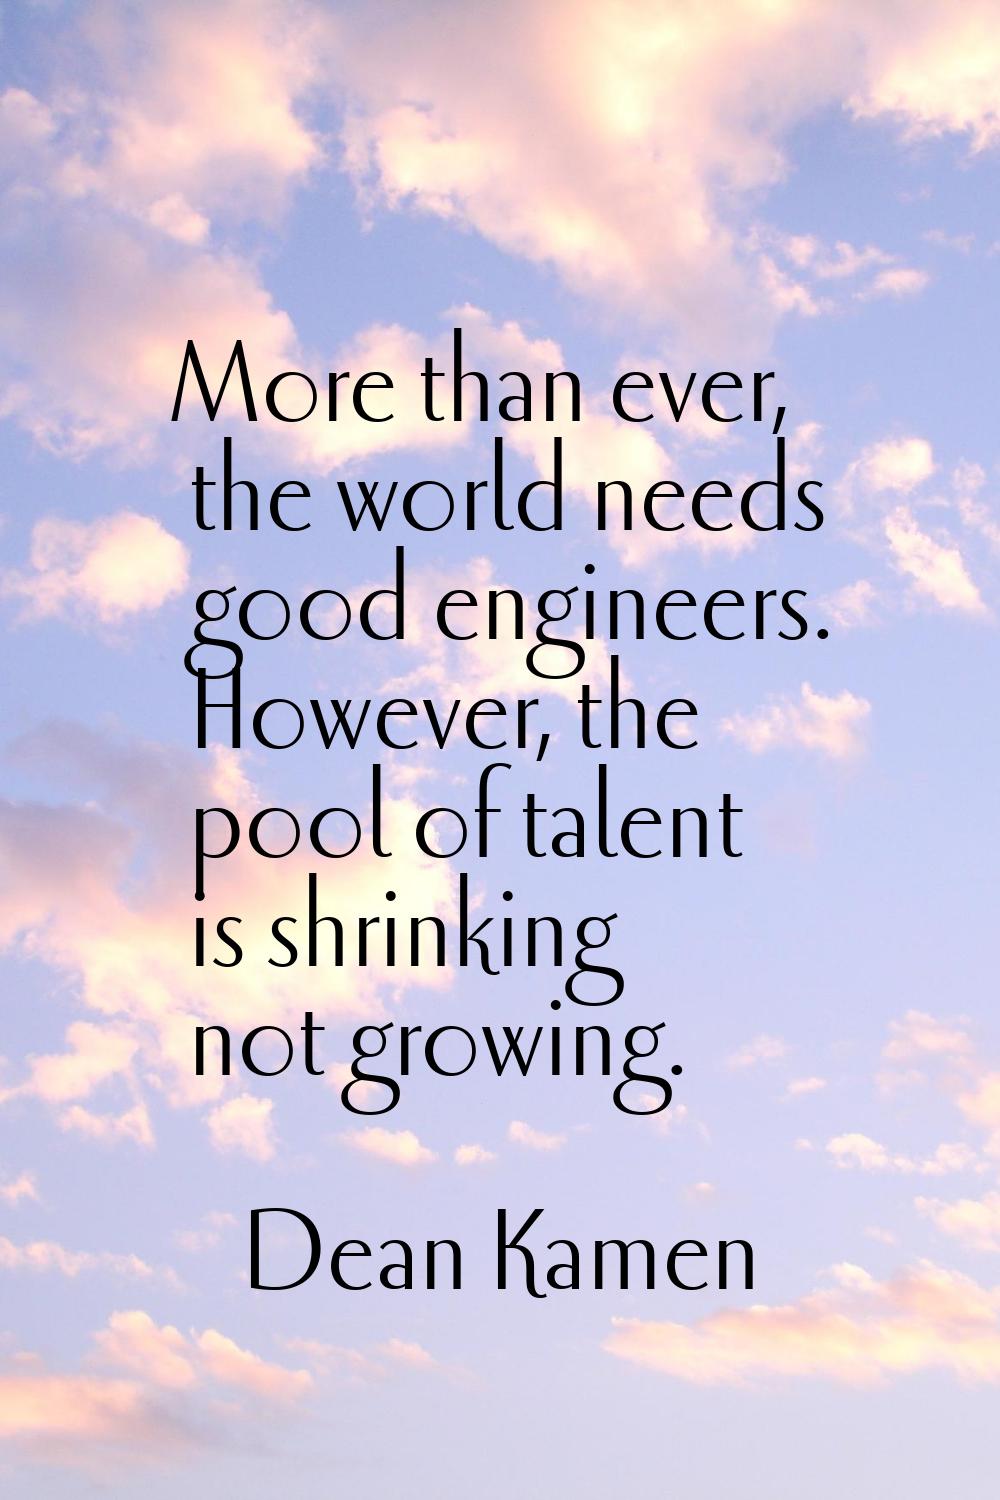 More than ever, the world needs good engineers. However, the pool of talent is shrinking not growin